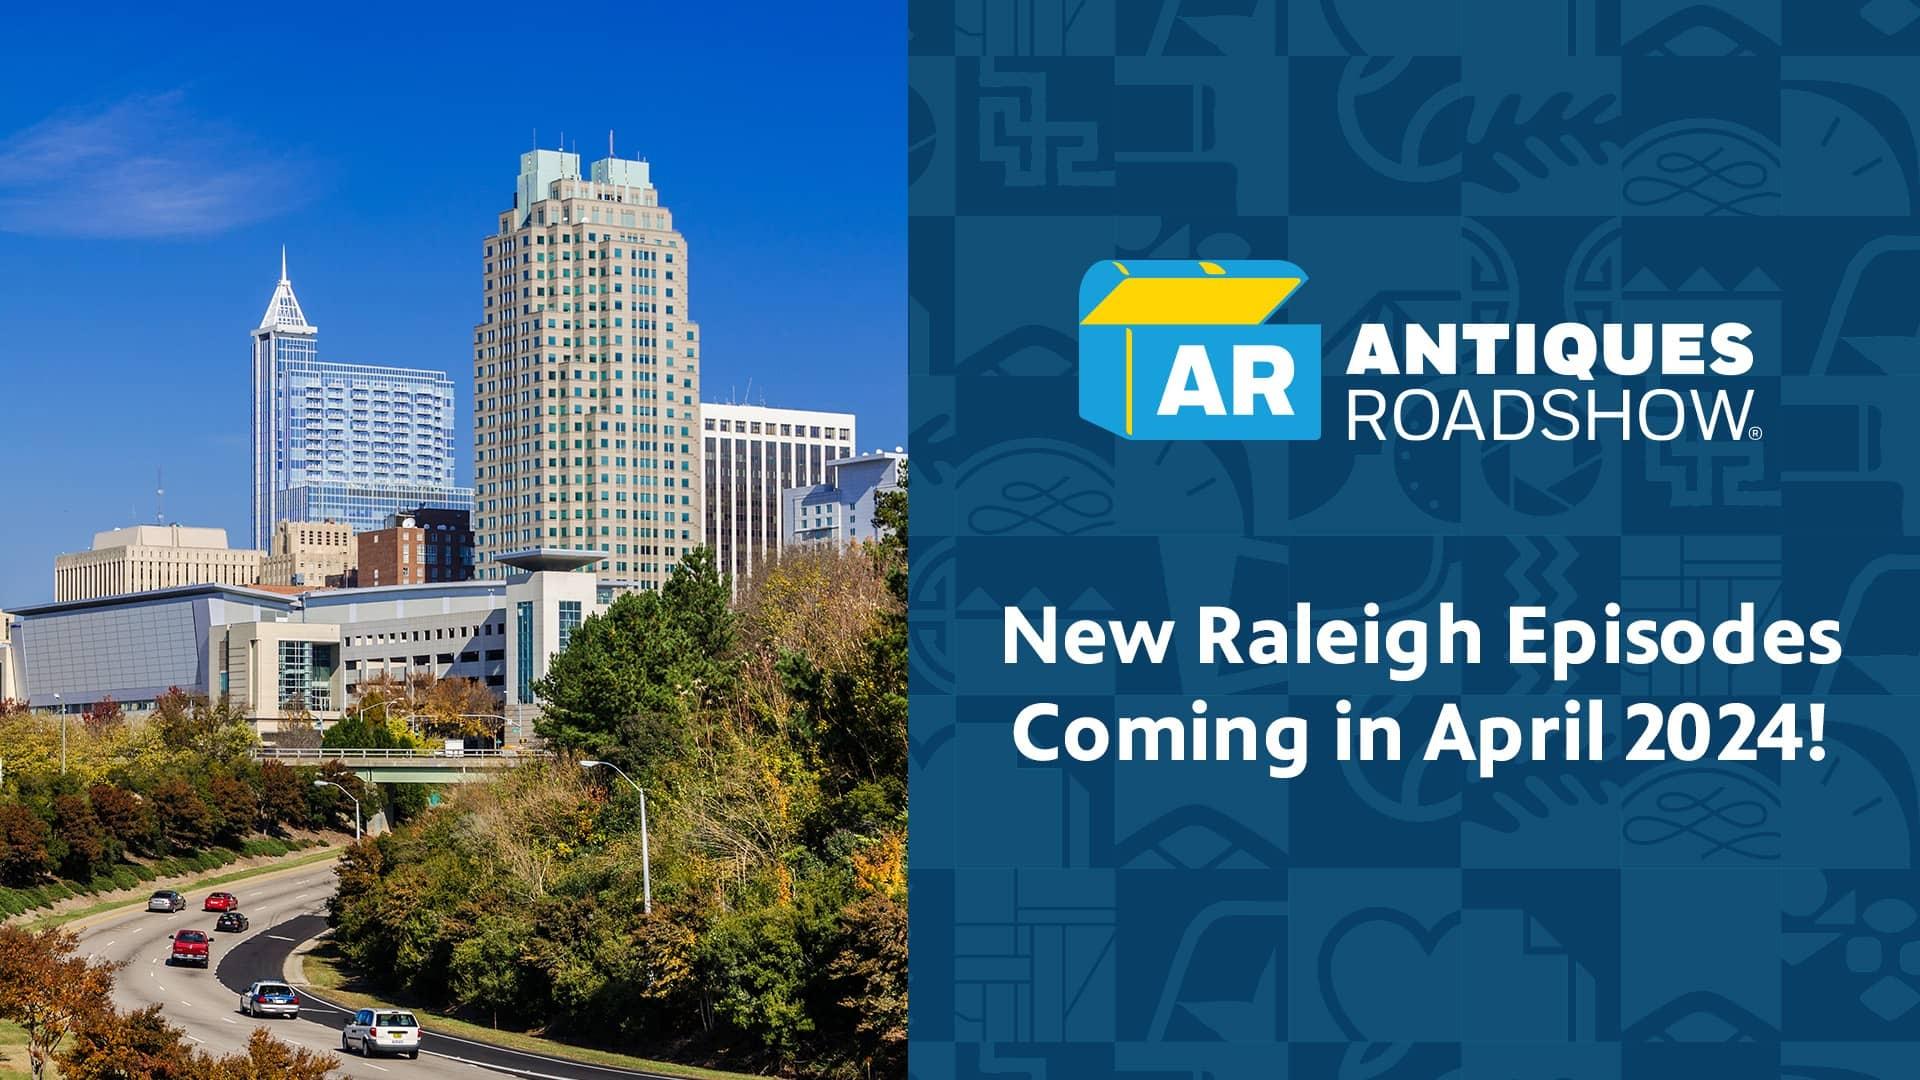 An image of the Raleigh skyline with the Antiques Roadshow logo and the text "New Raleigh Episodes Coming in April 2024!"